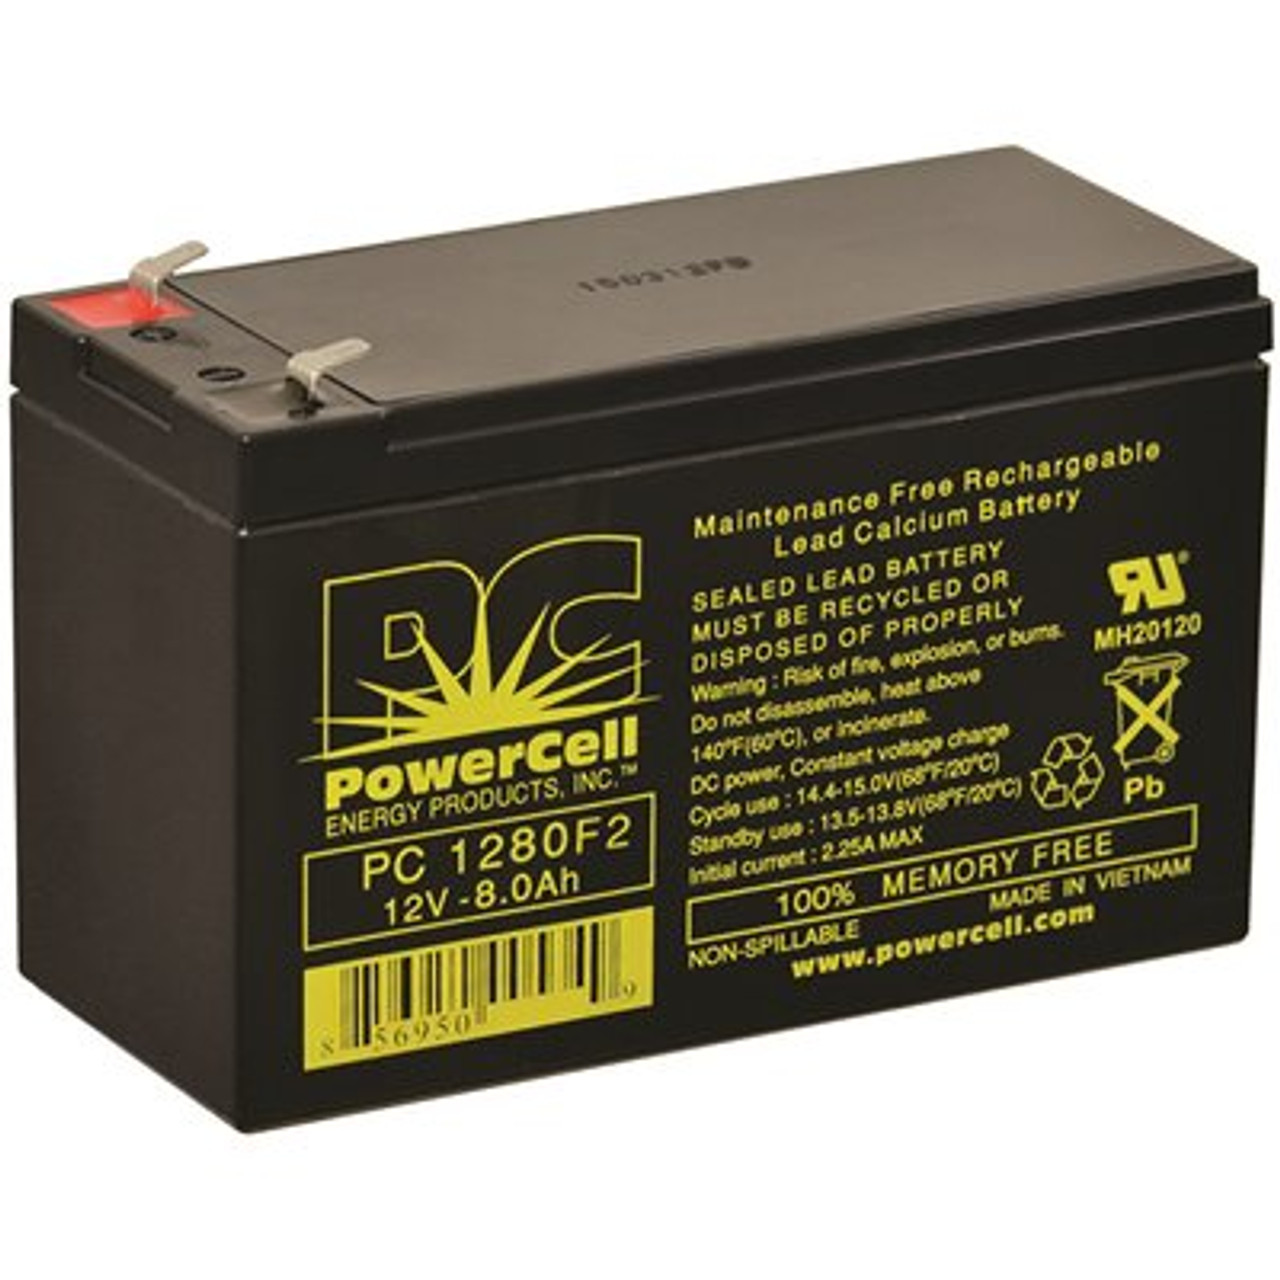 12-Volt 8.0 Ah, F2 Terminal, Sealed Lead-Acid, AGM, Maintenance Free, Rechargeable, Non-spillable, Battery